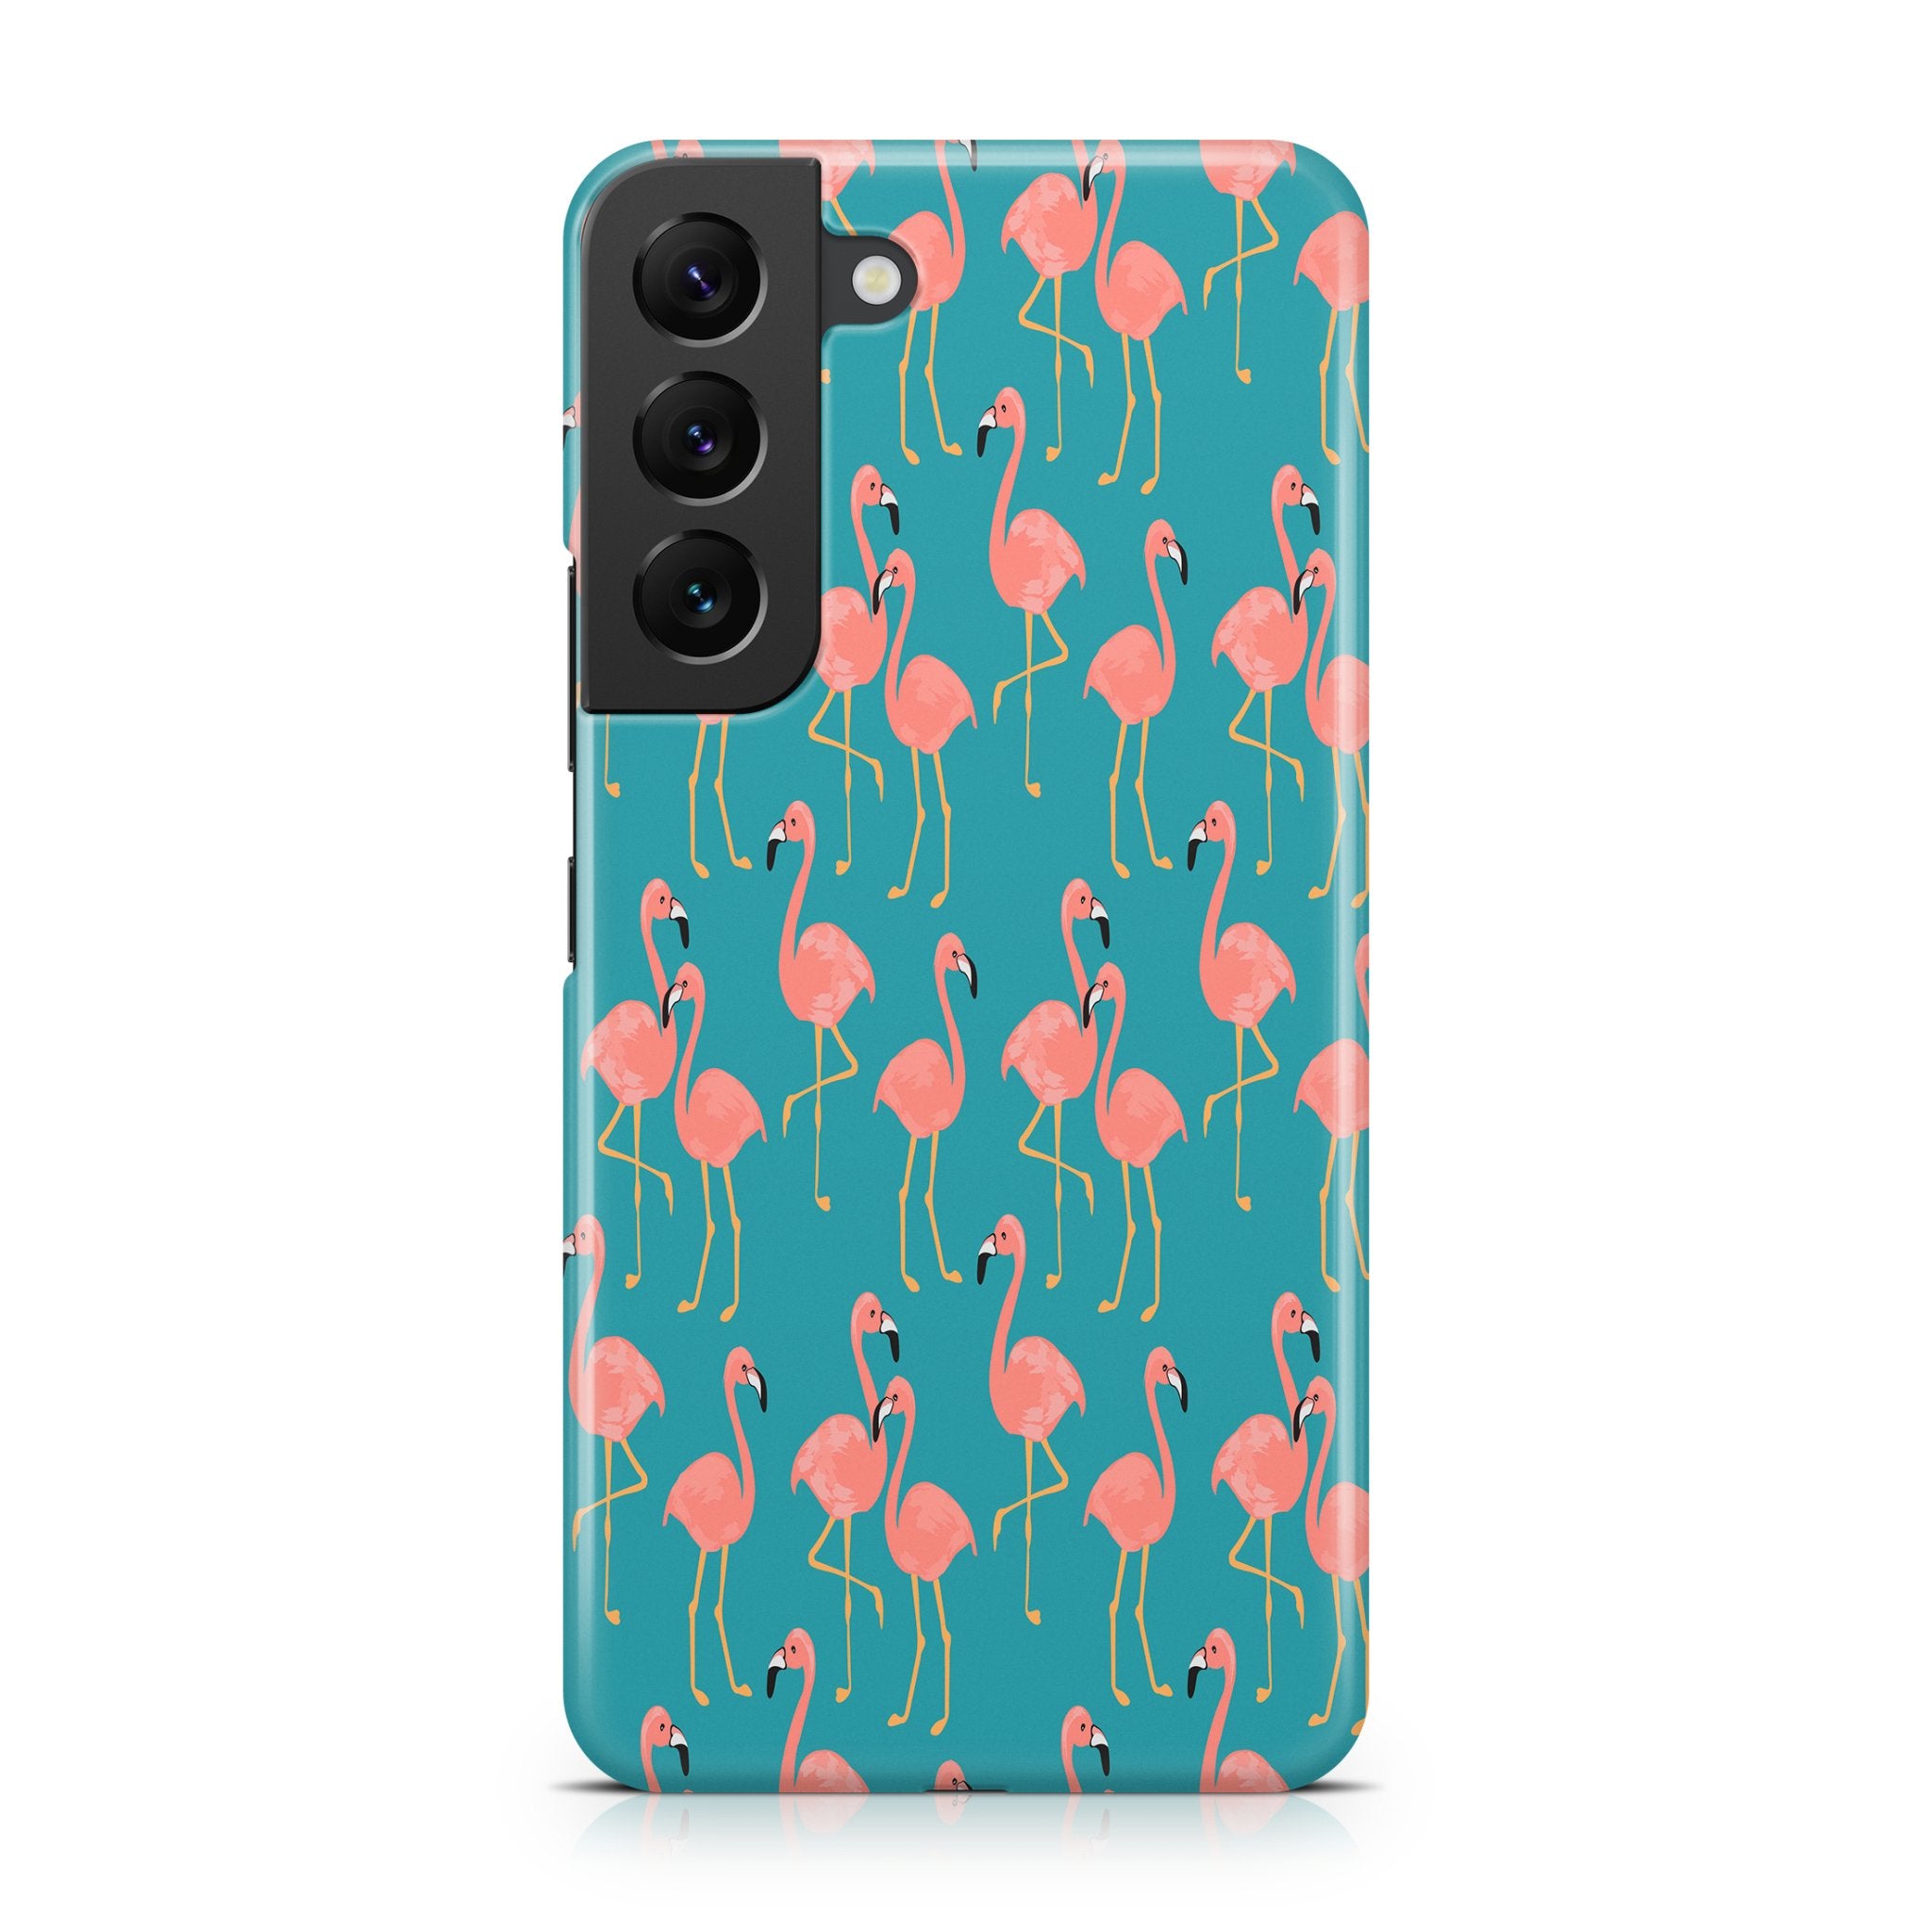 Flamingo Fiesta - Samsung phone case designs by CaseSwagger